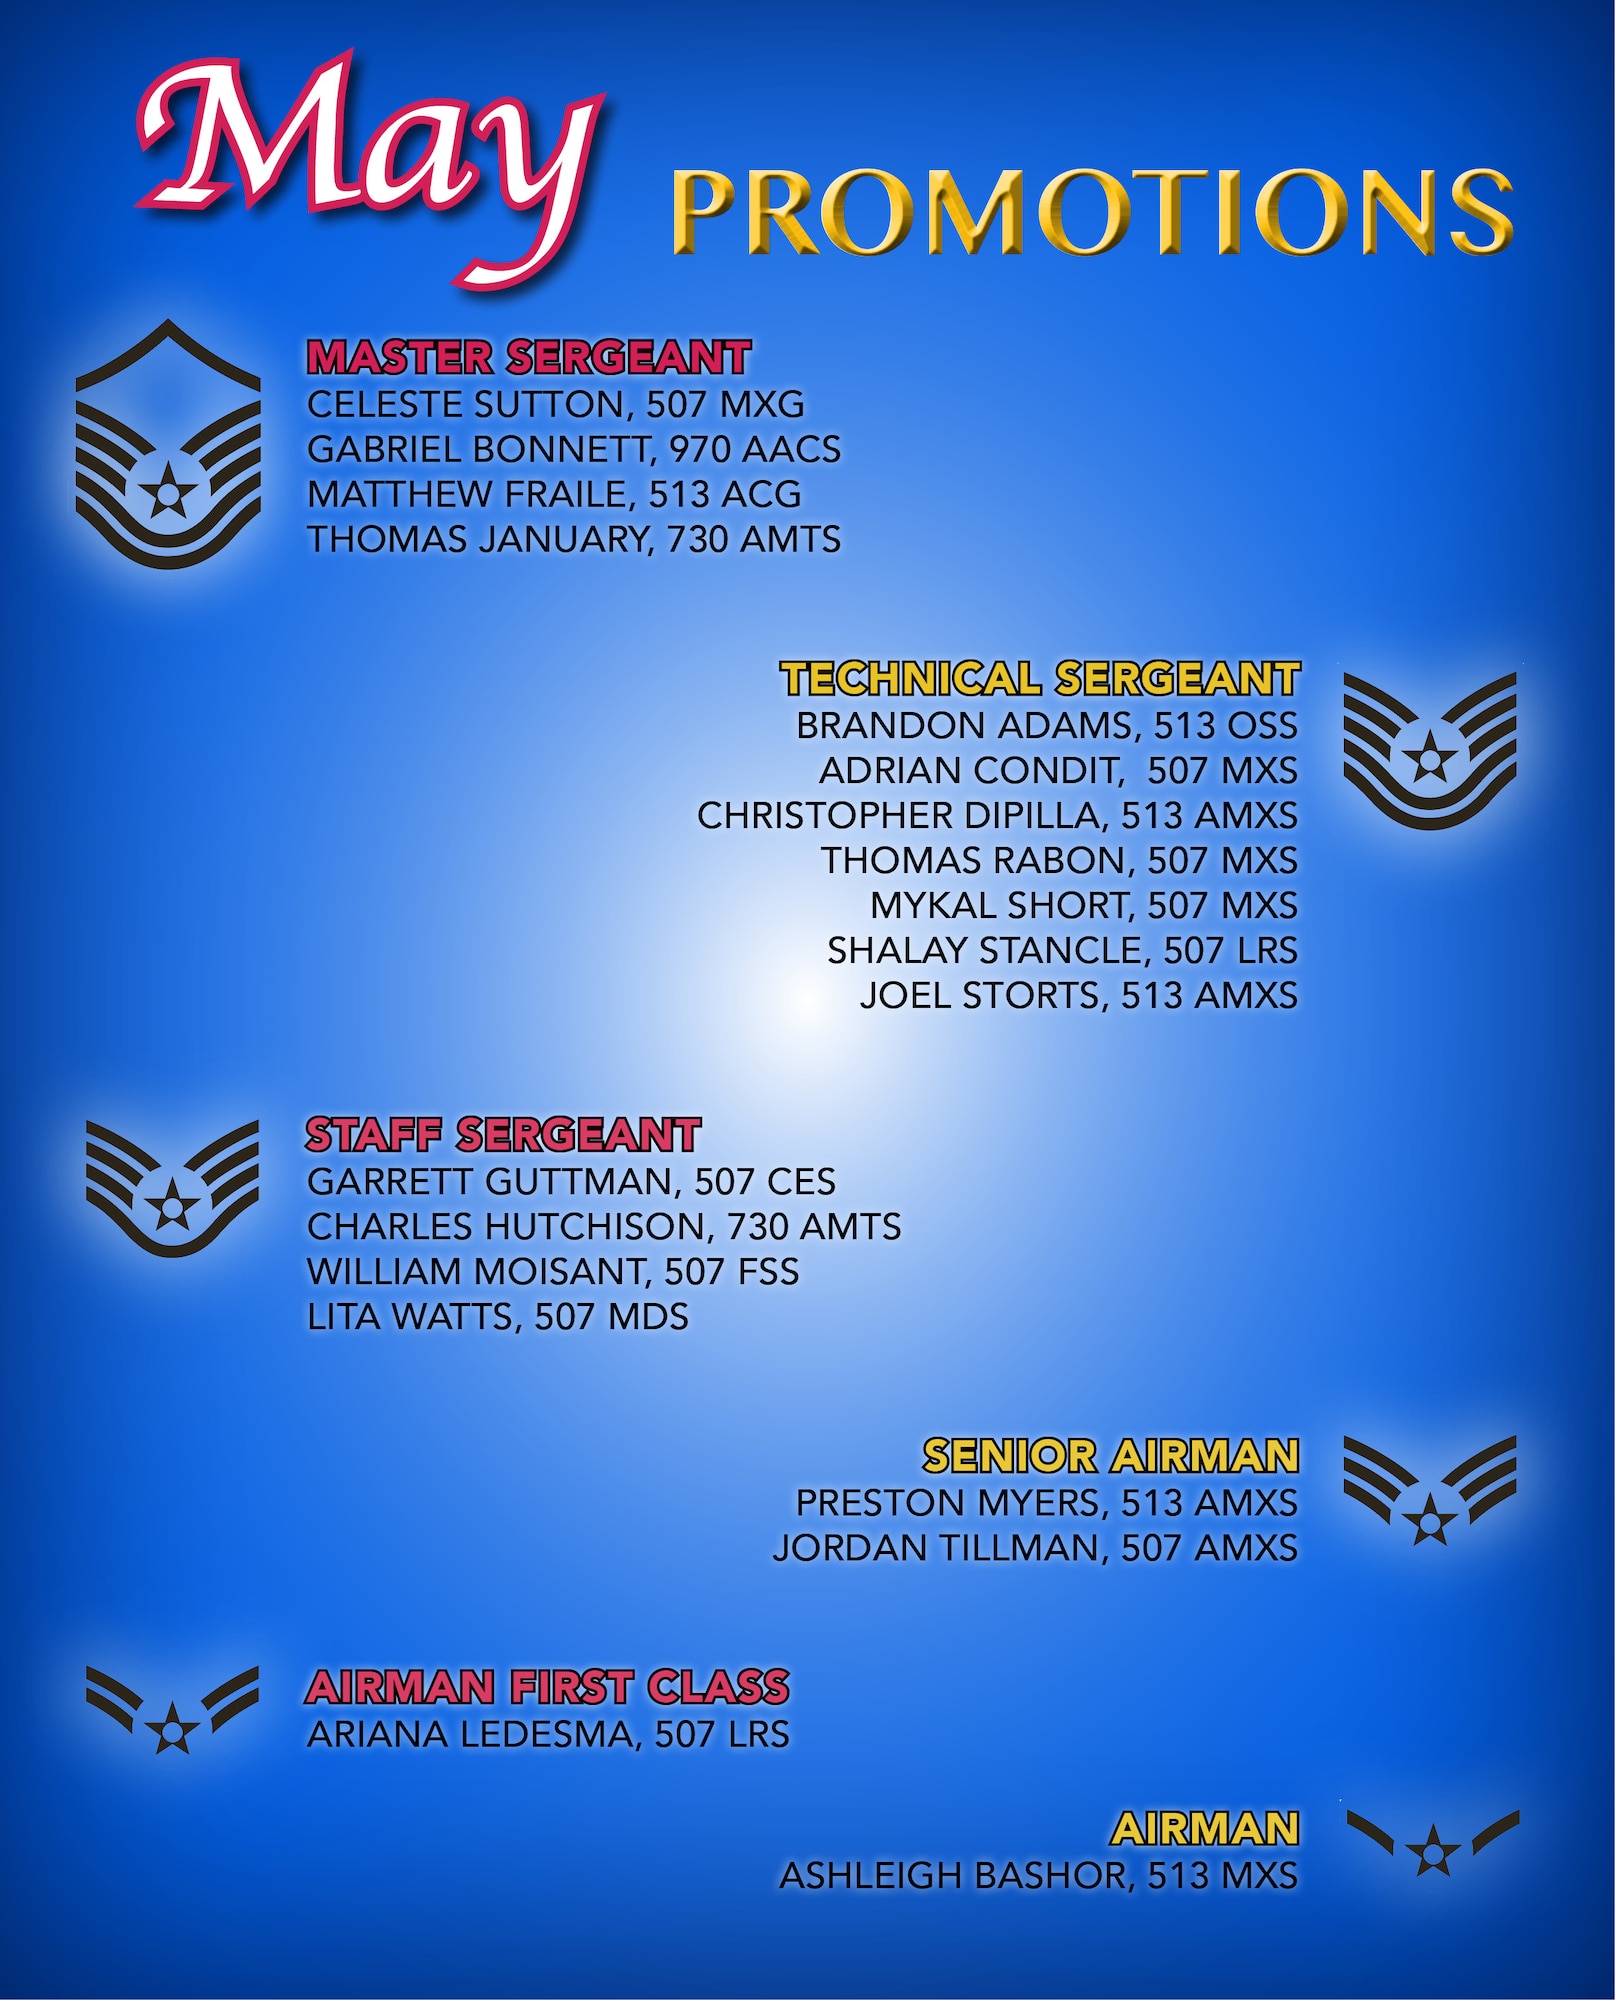 The 507th Air Refueling Wing enlisted promotion list for May 2019 at Tinker Air Force Base, Oklahoma. (U.S. Air Force image by Tech. Sgt. Samantha Mathison)